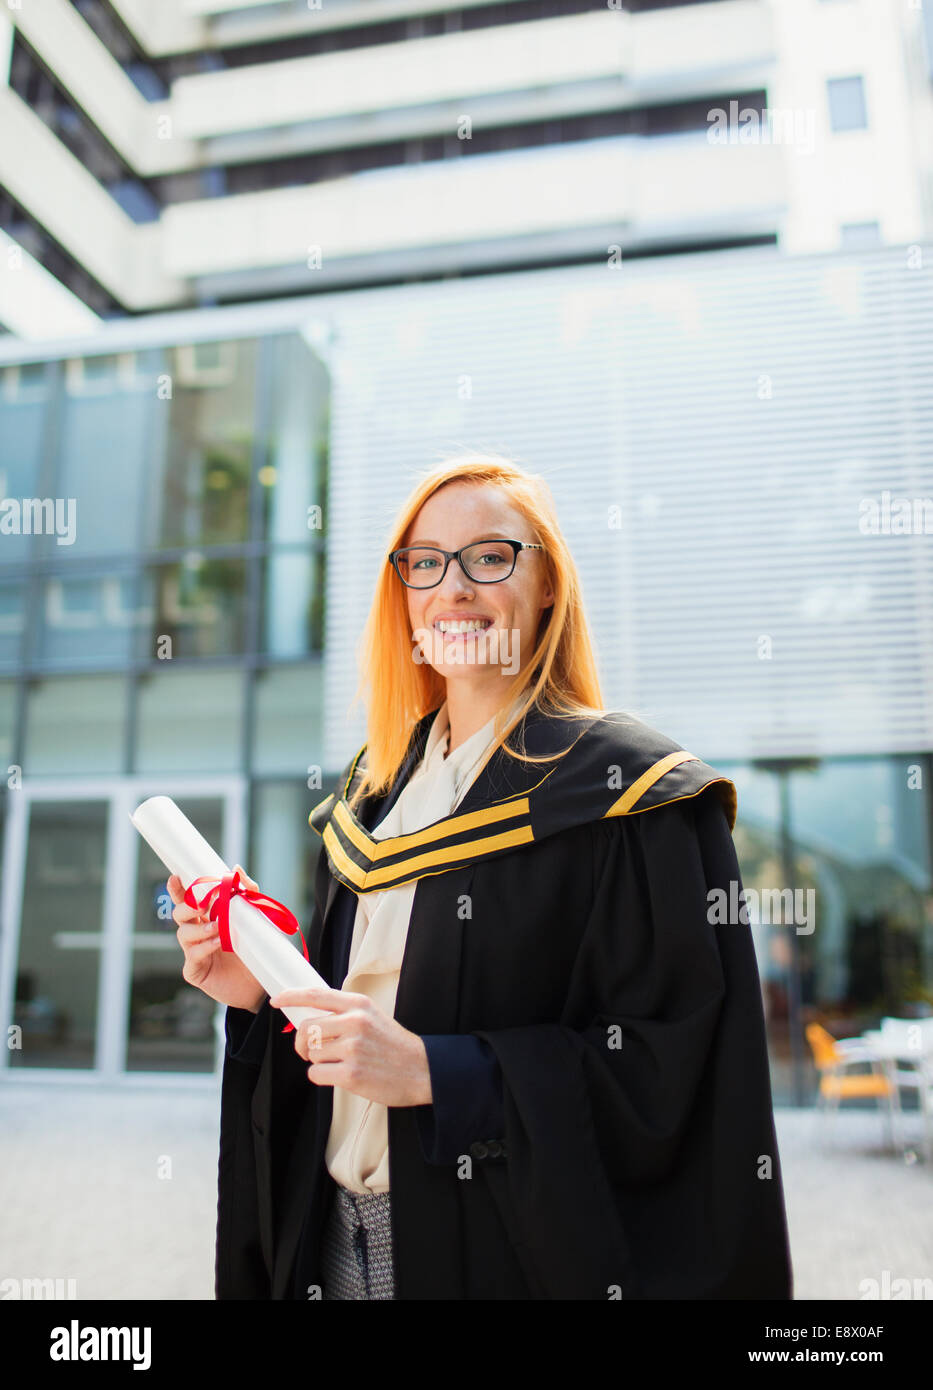 Student in cap and gown holding scroll Stock Photo